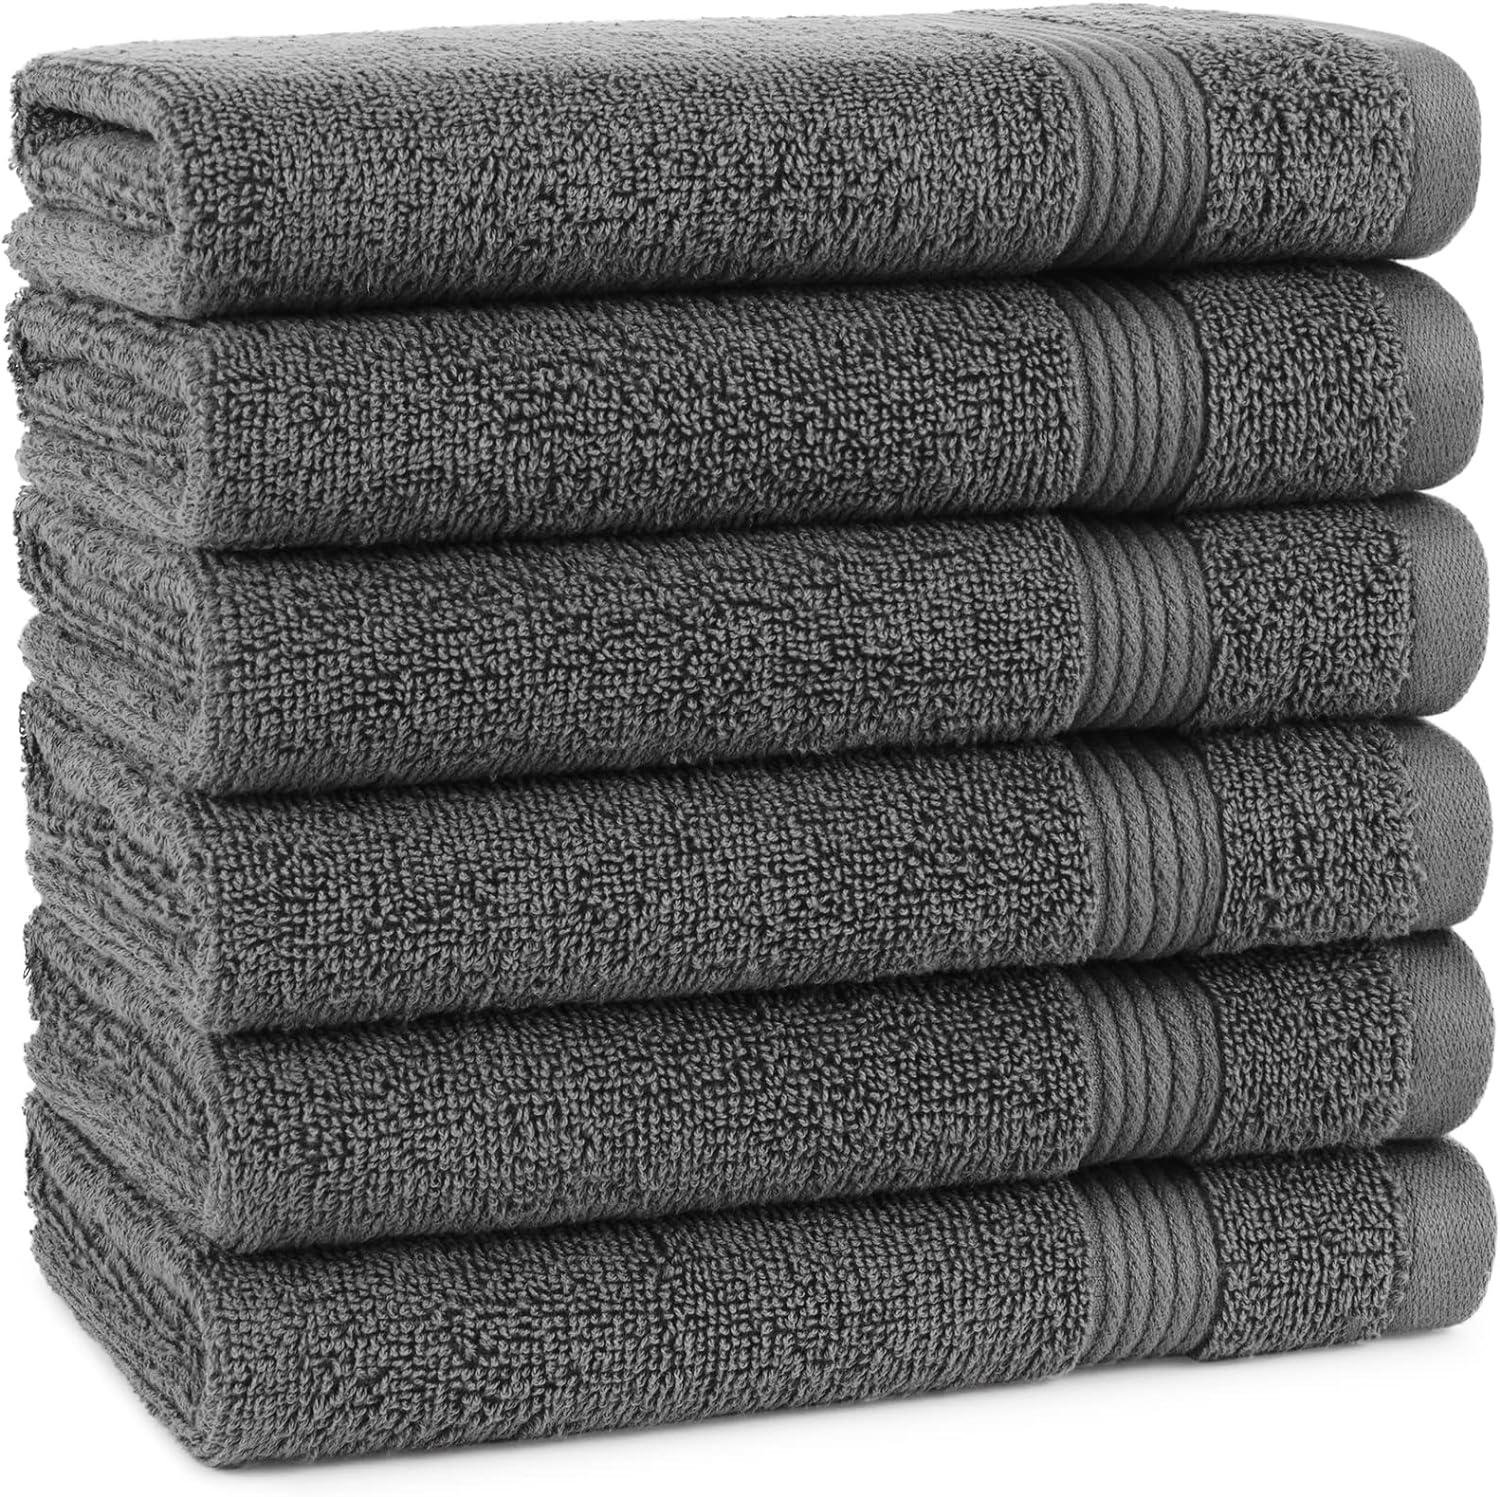 Cotton Hand Towels, Solid Gray/White 10-Pack